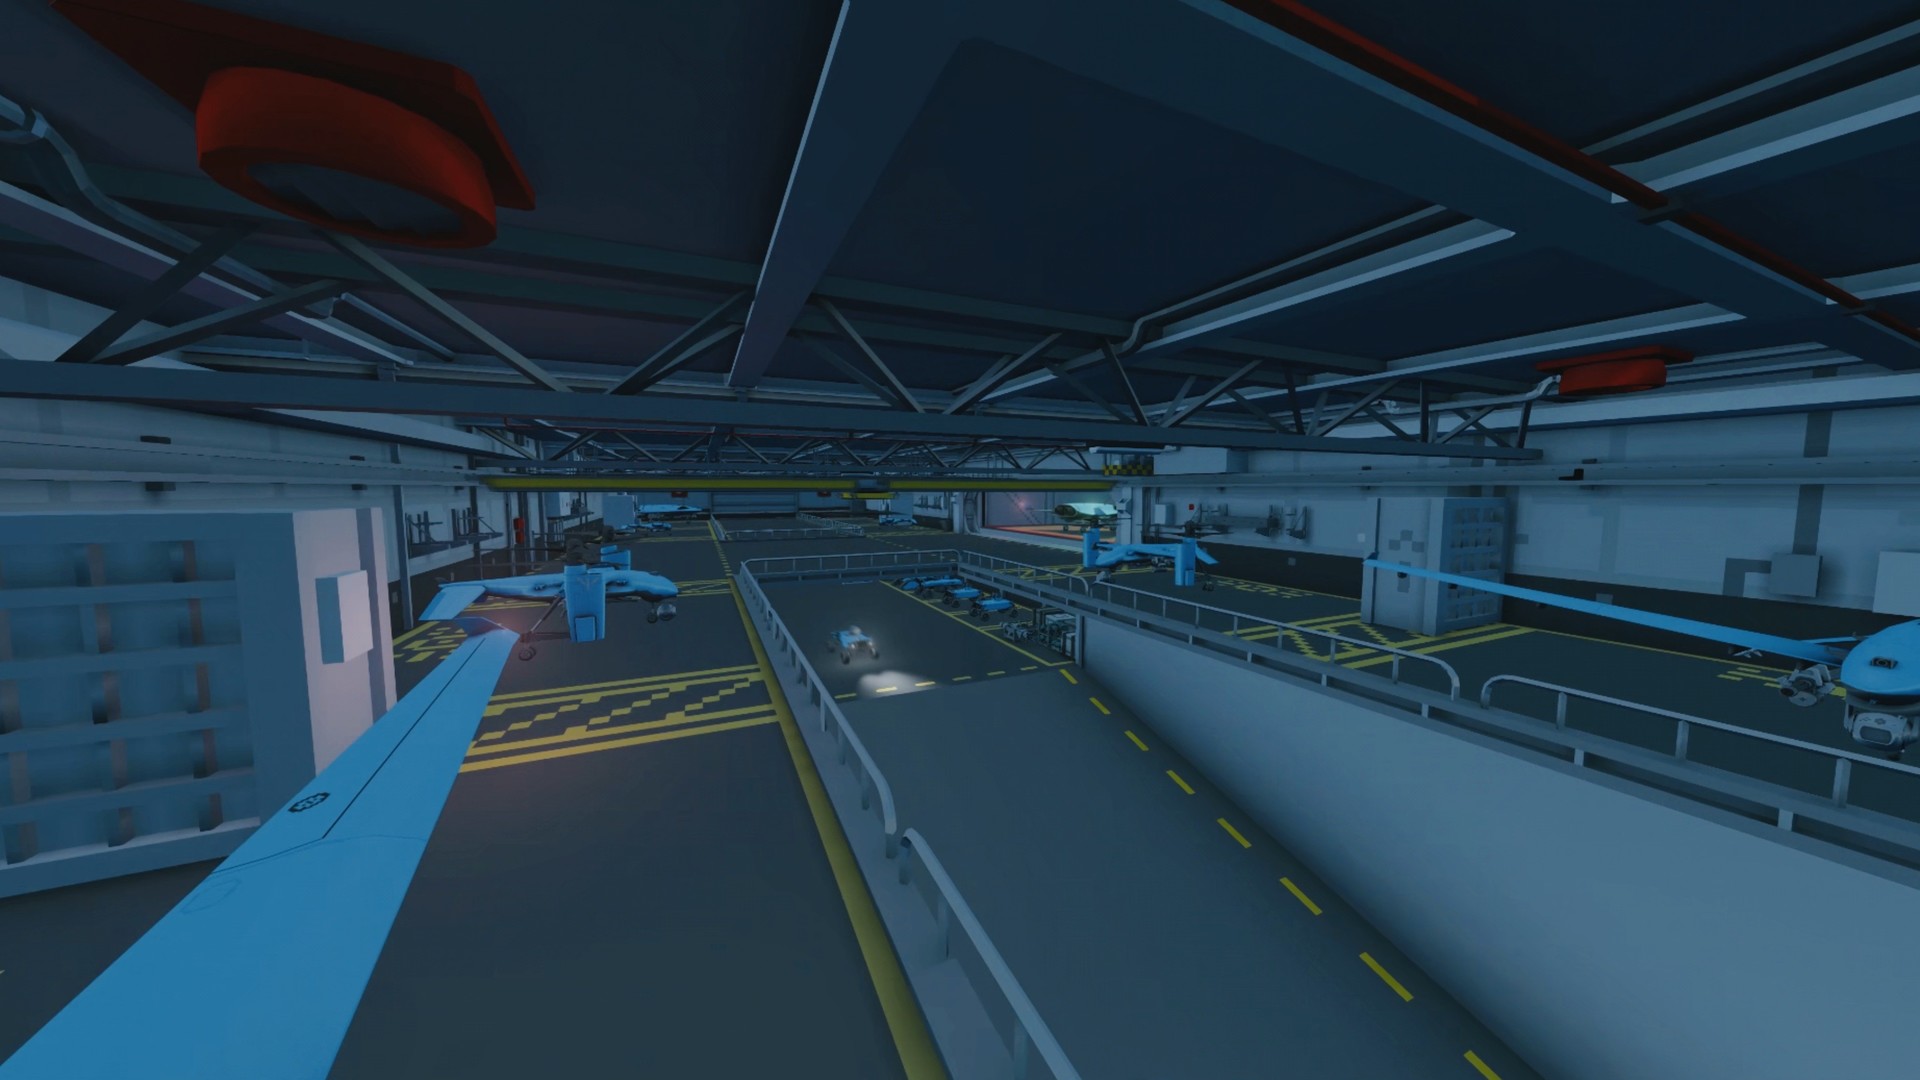 carrier command 2 vr